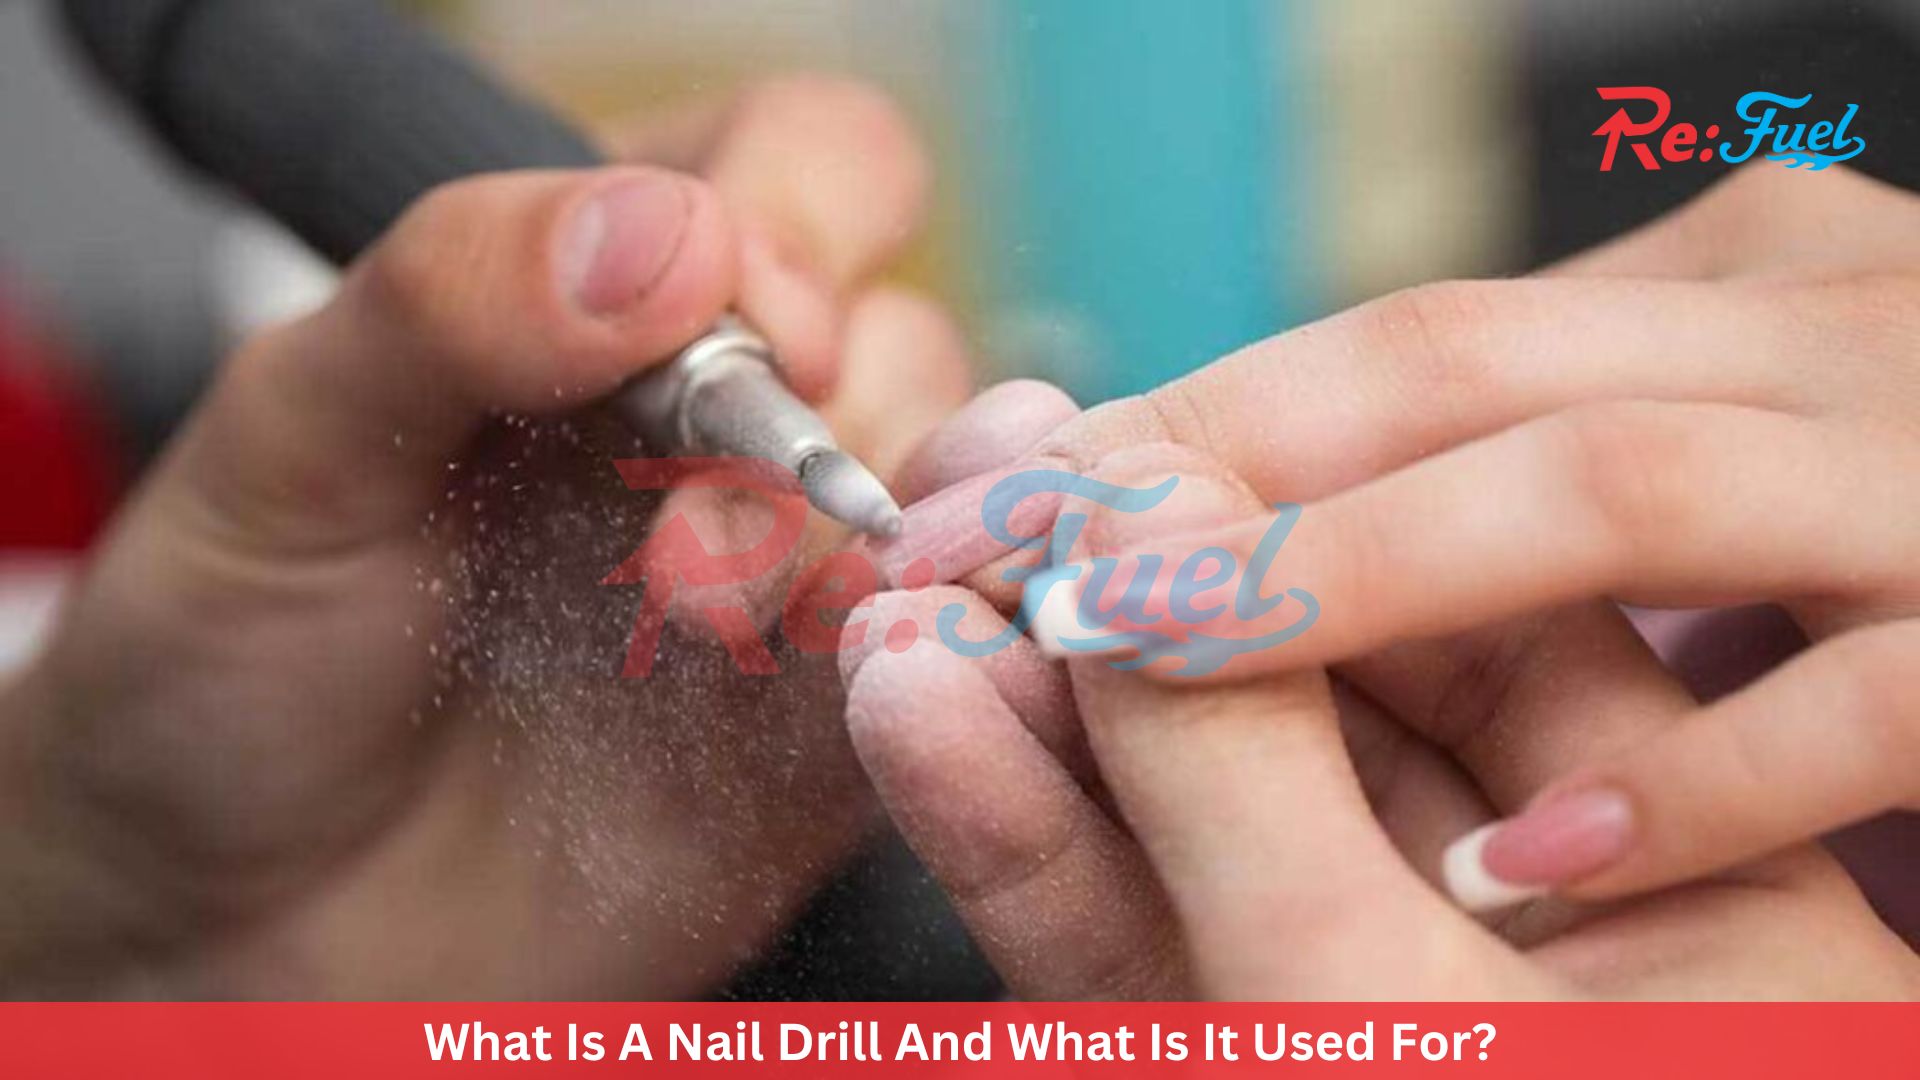 What Is A Nail Drill And What Is It Used For?